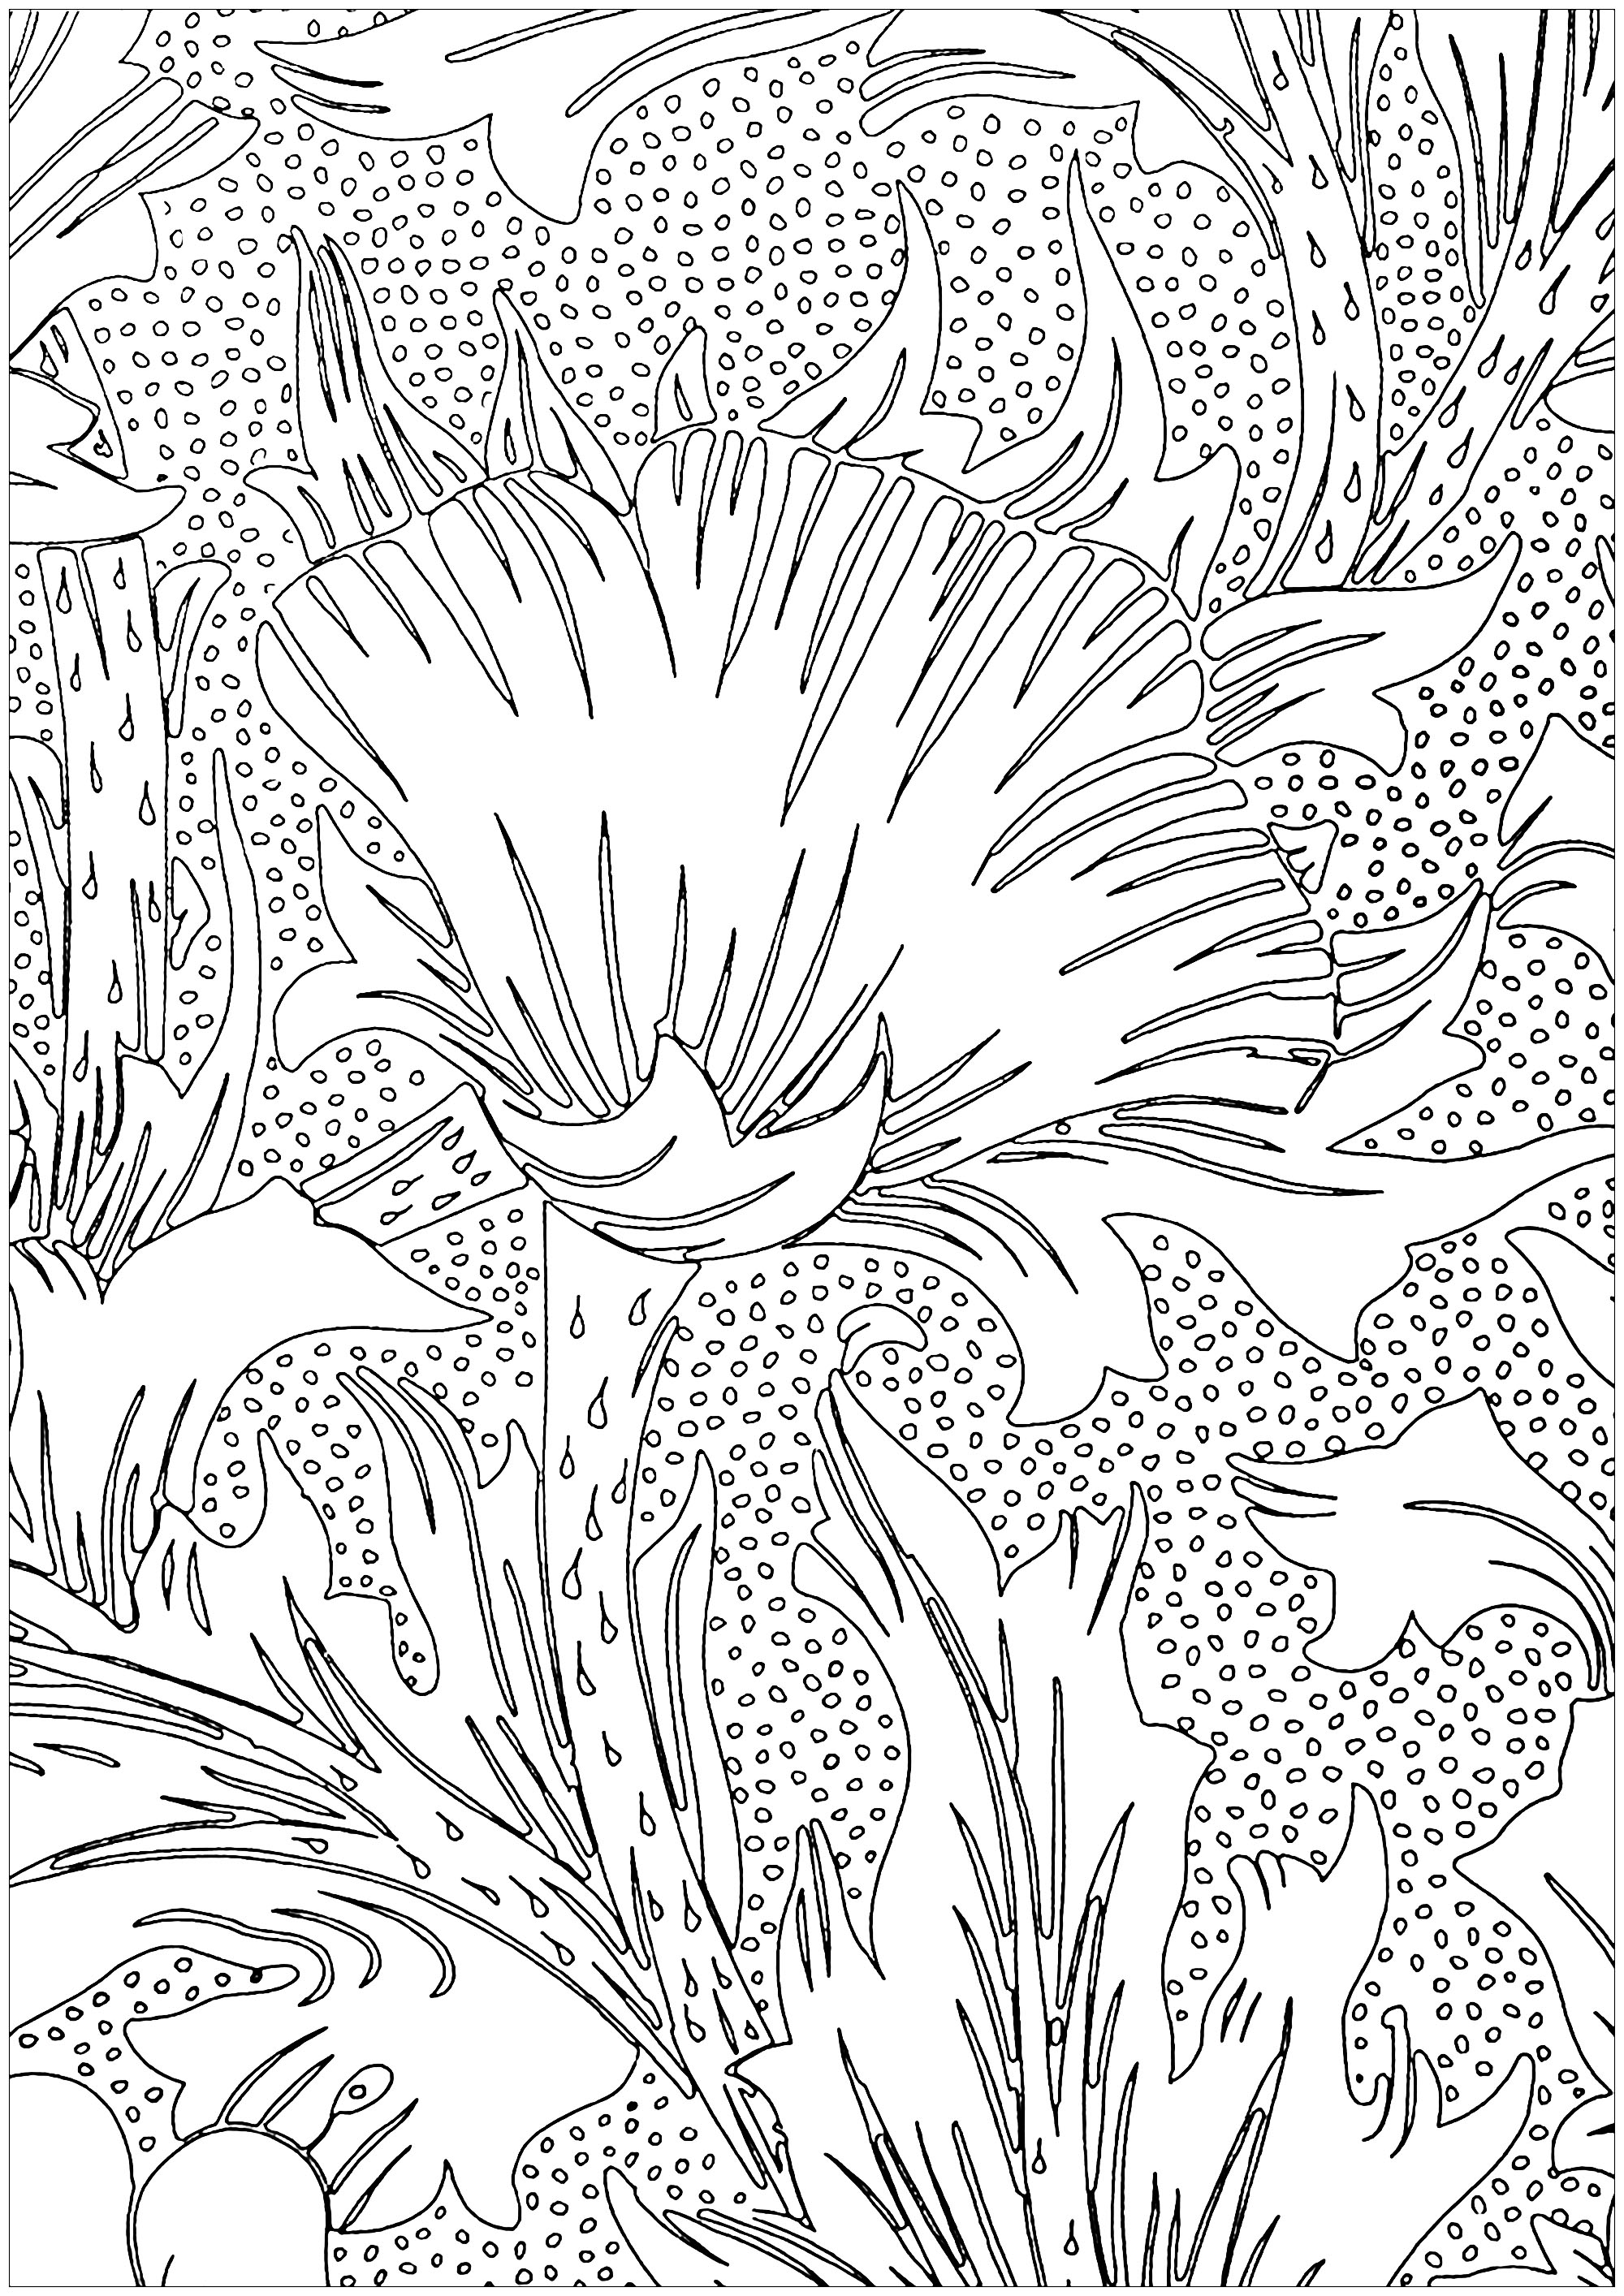 Coloring page created from an Arts & Crafts Design representing flowers, by May Morris (1885). May Morris (1862 1938), younger daughter of William Morris, was an English artist, artisan, embroidery designer, jeweller, and leading female exponent of the British Arts & Crafts movement. Specializing in embroidery, she designed some of Morris & Co. s most important textiles.